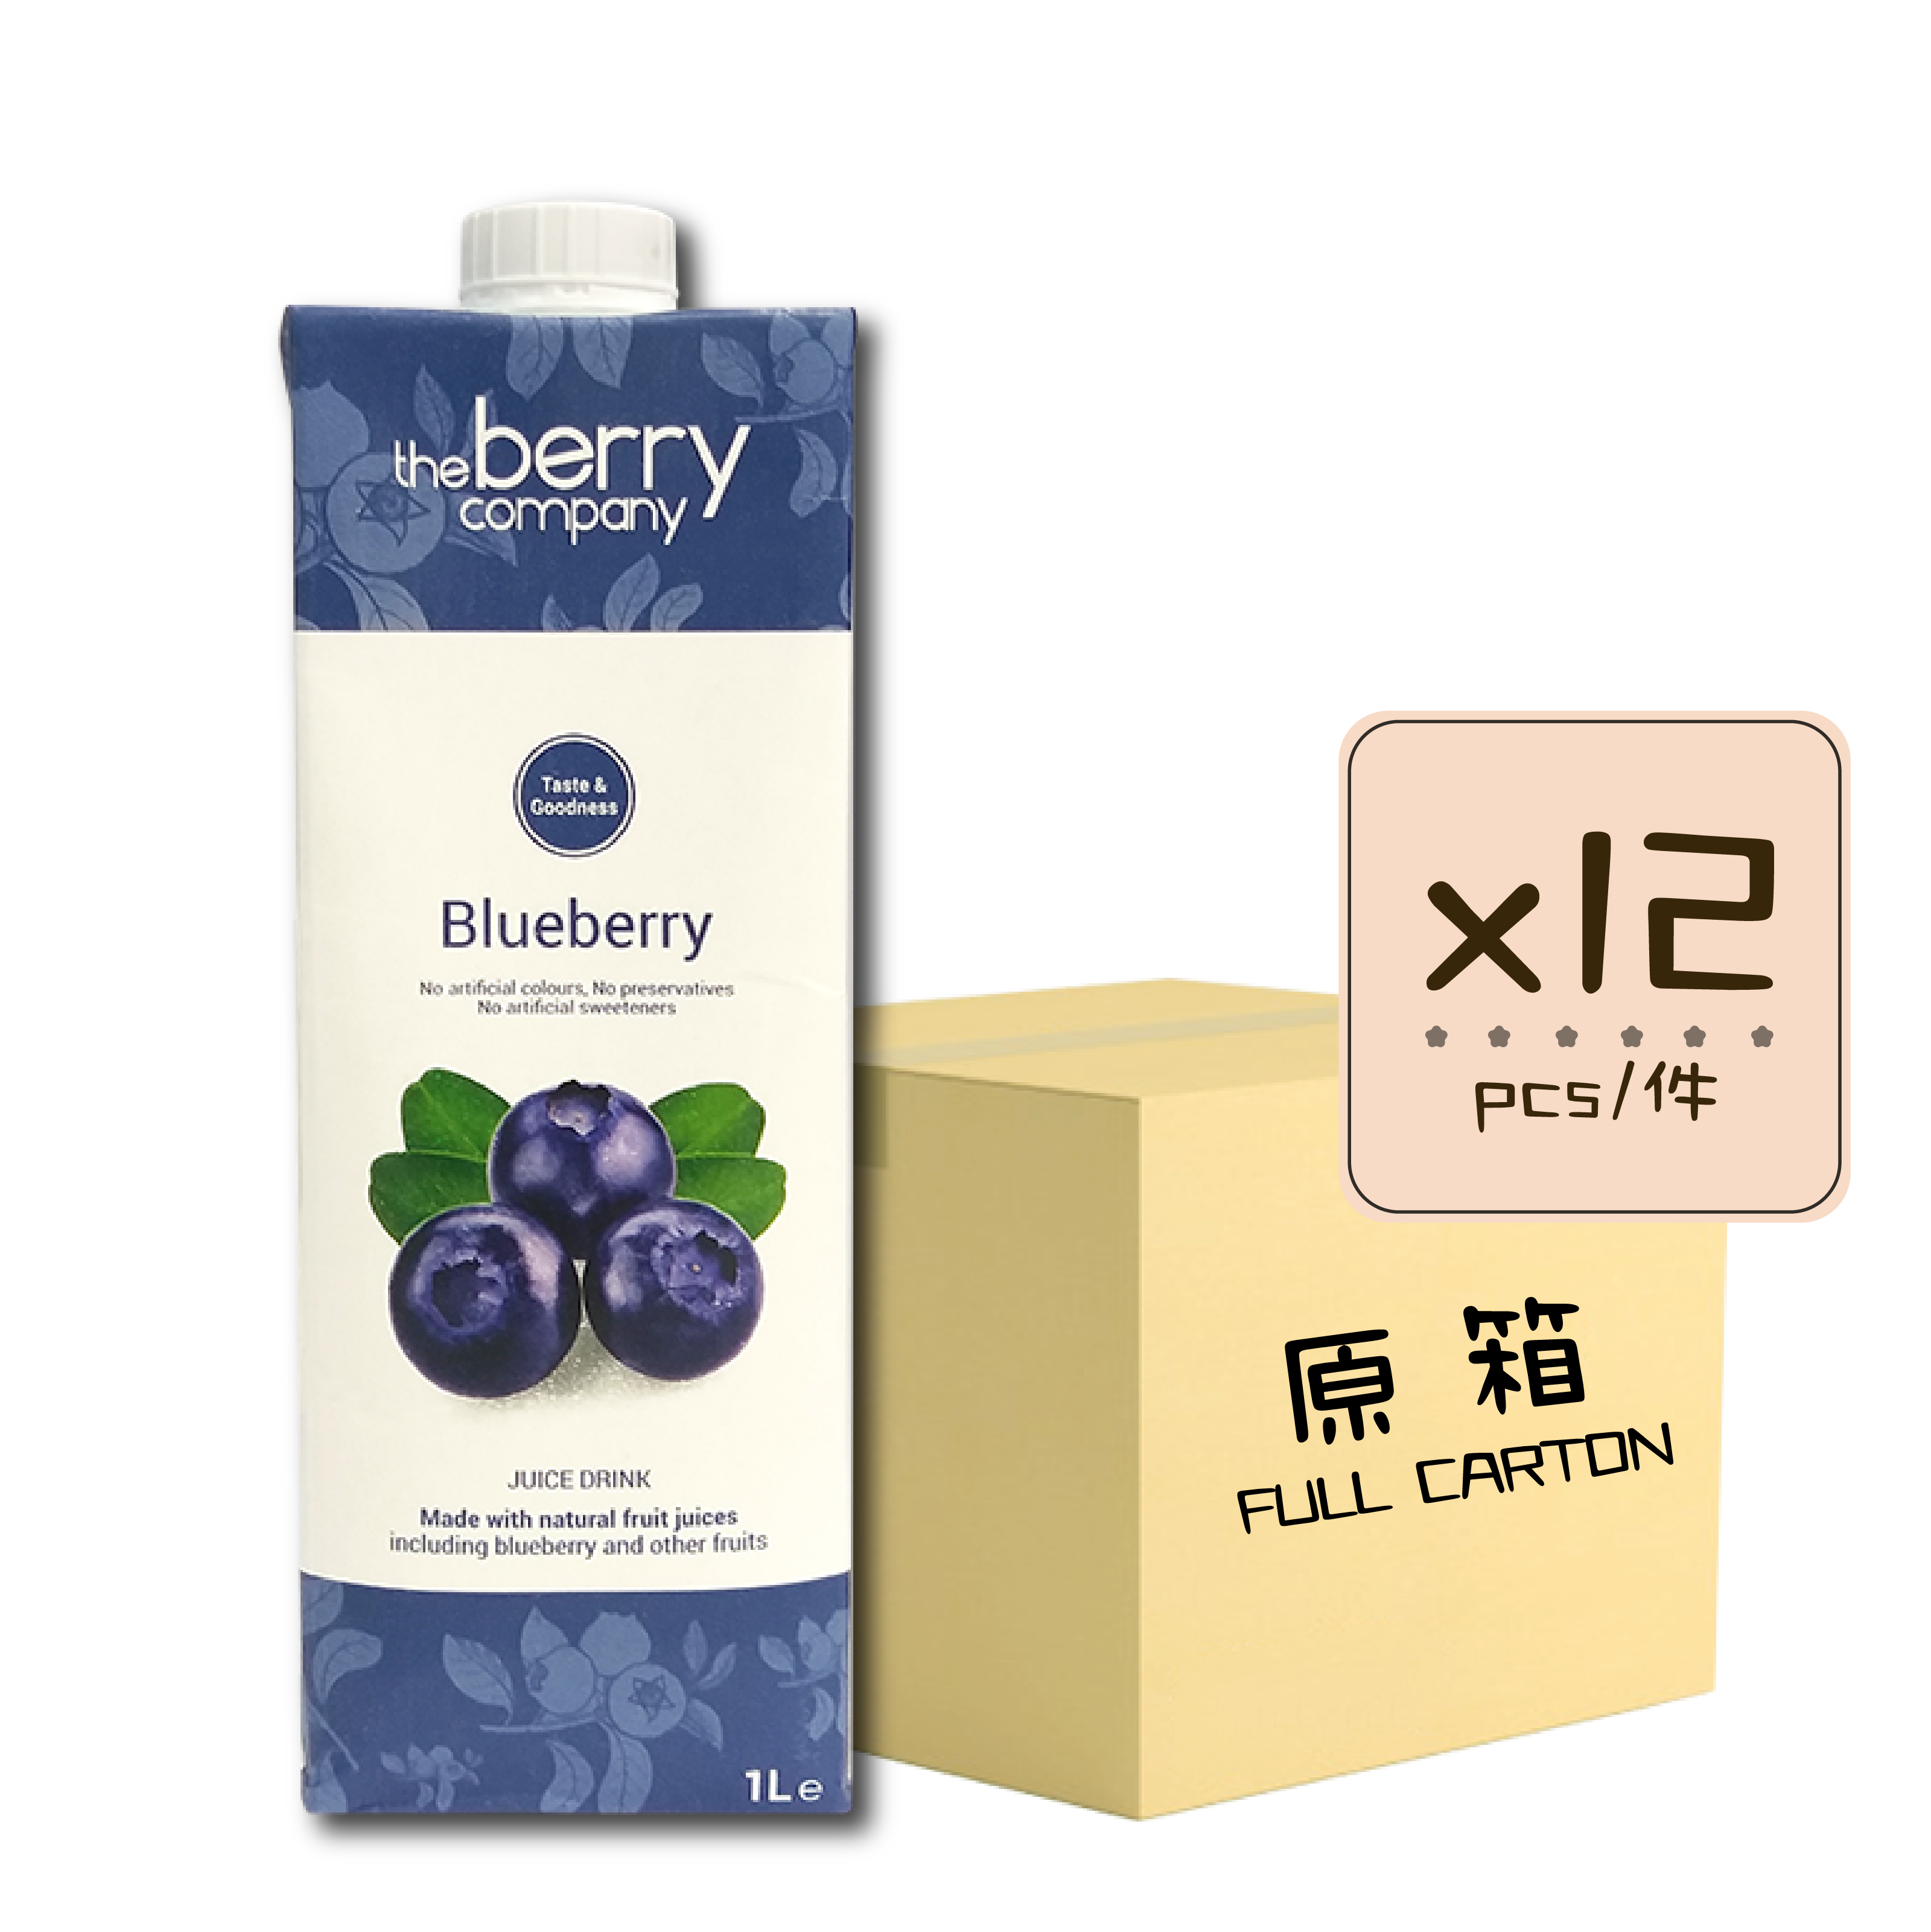 the berry company